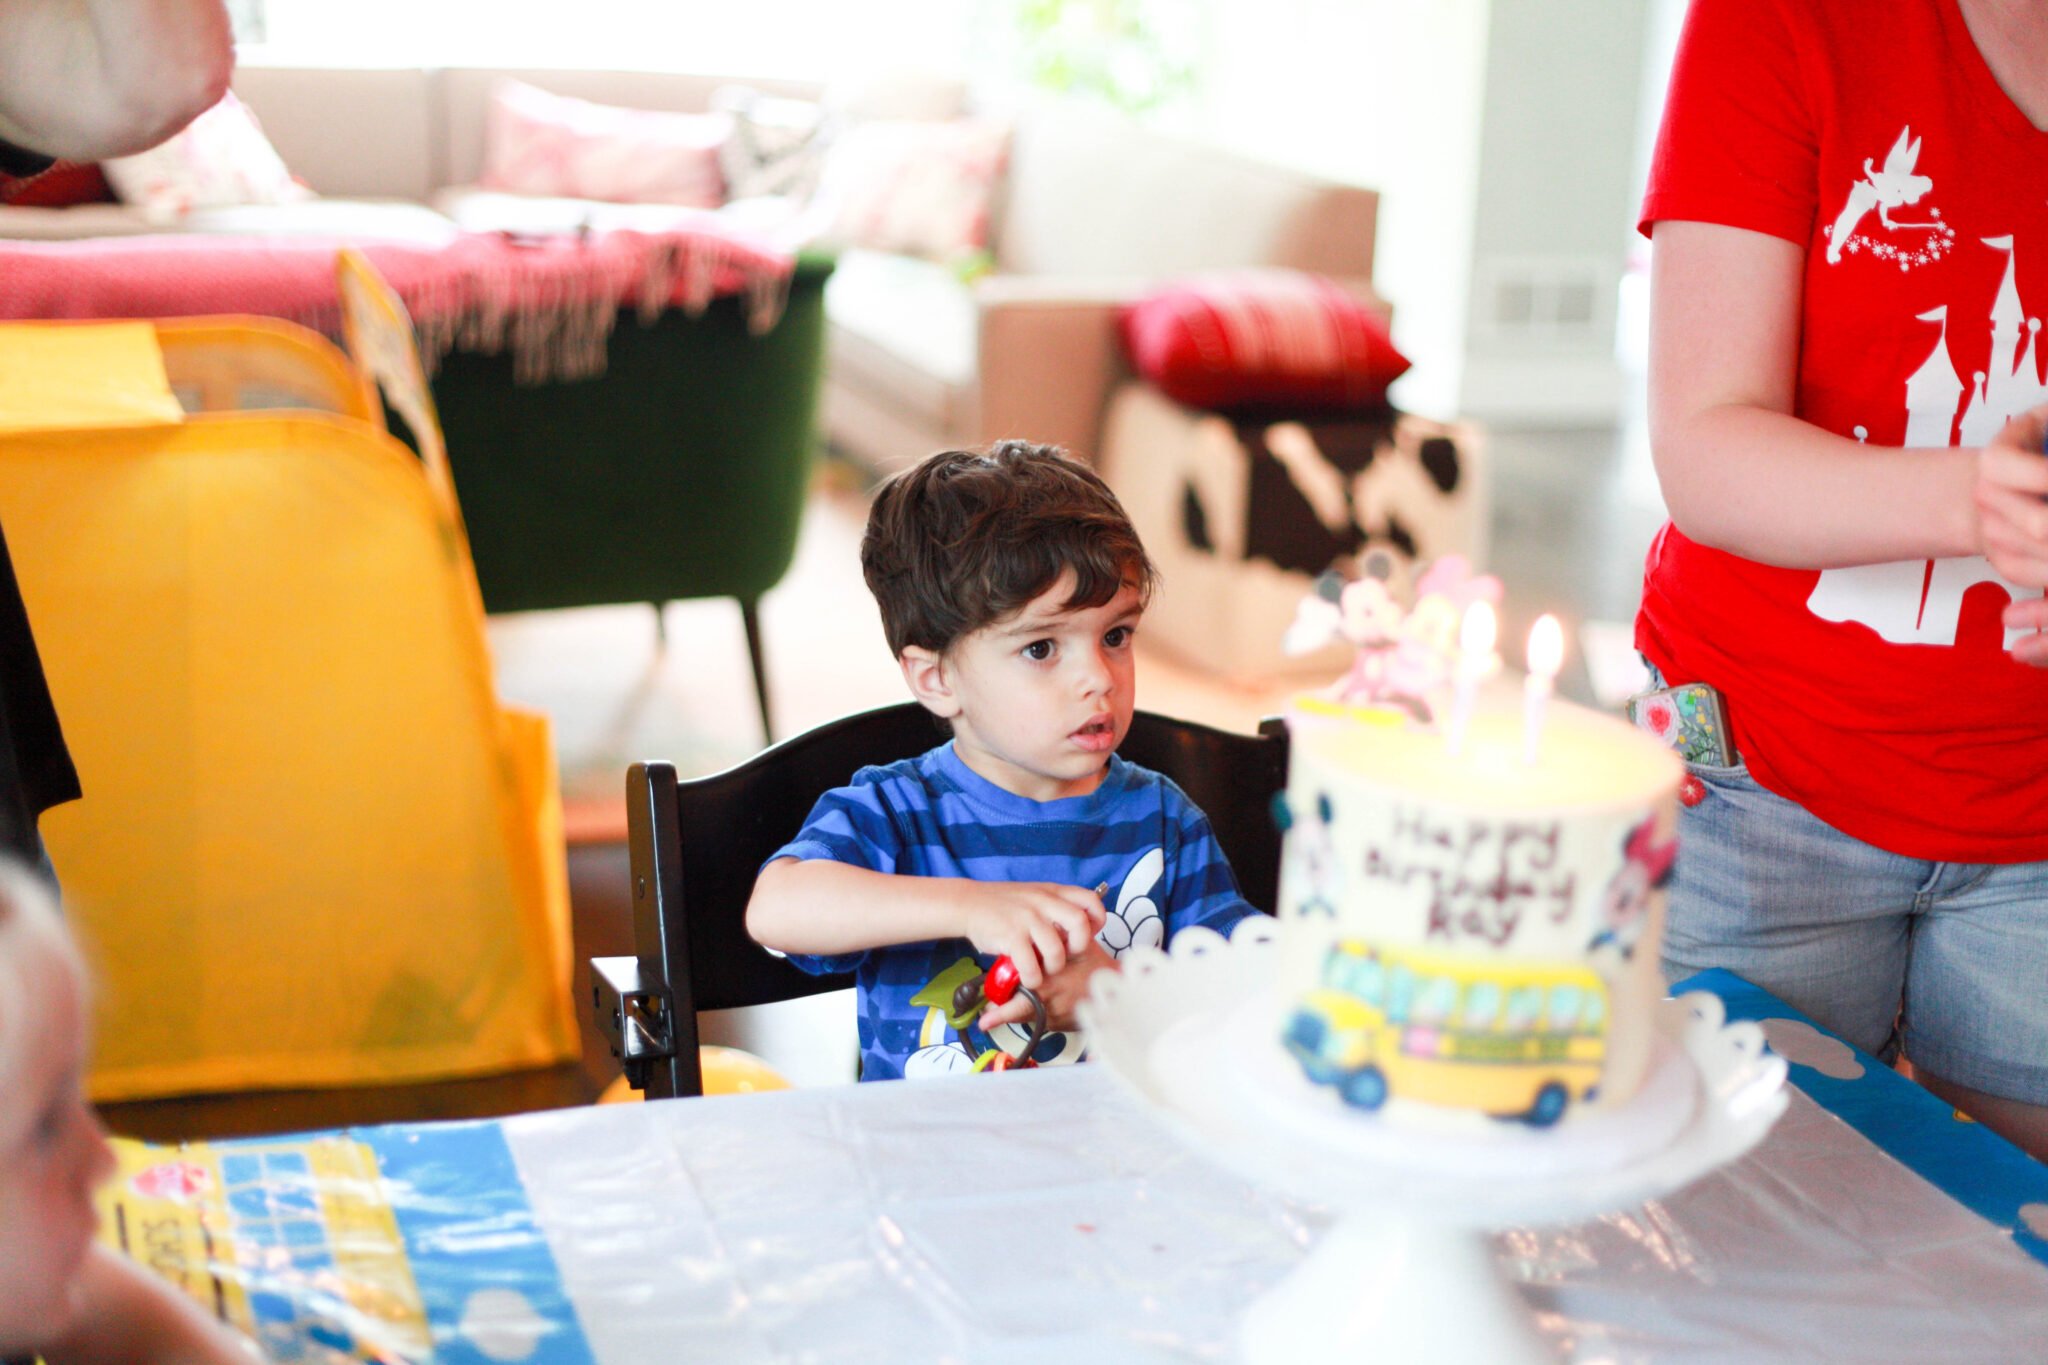 mickey mouse birthday cake and ears and tee